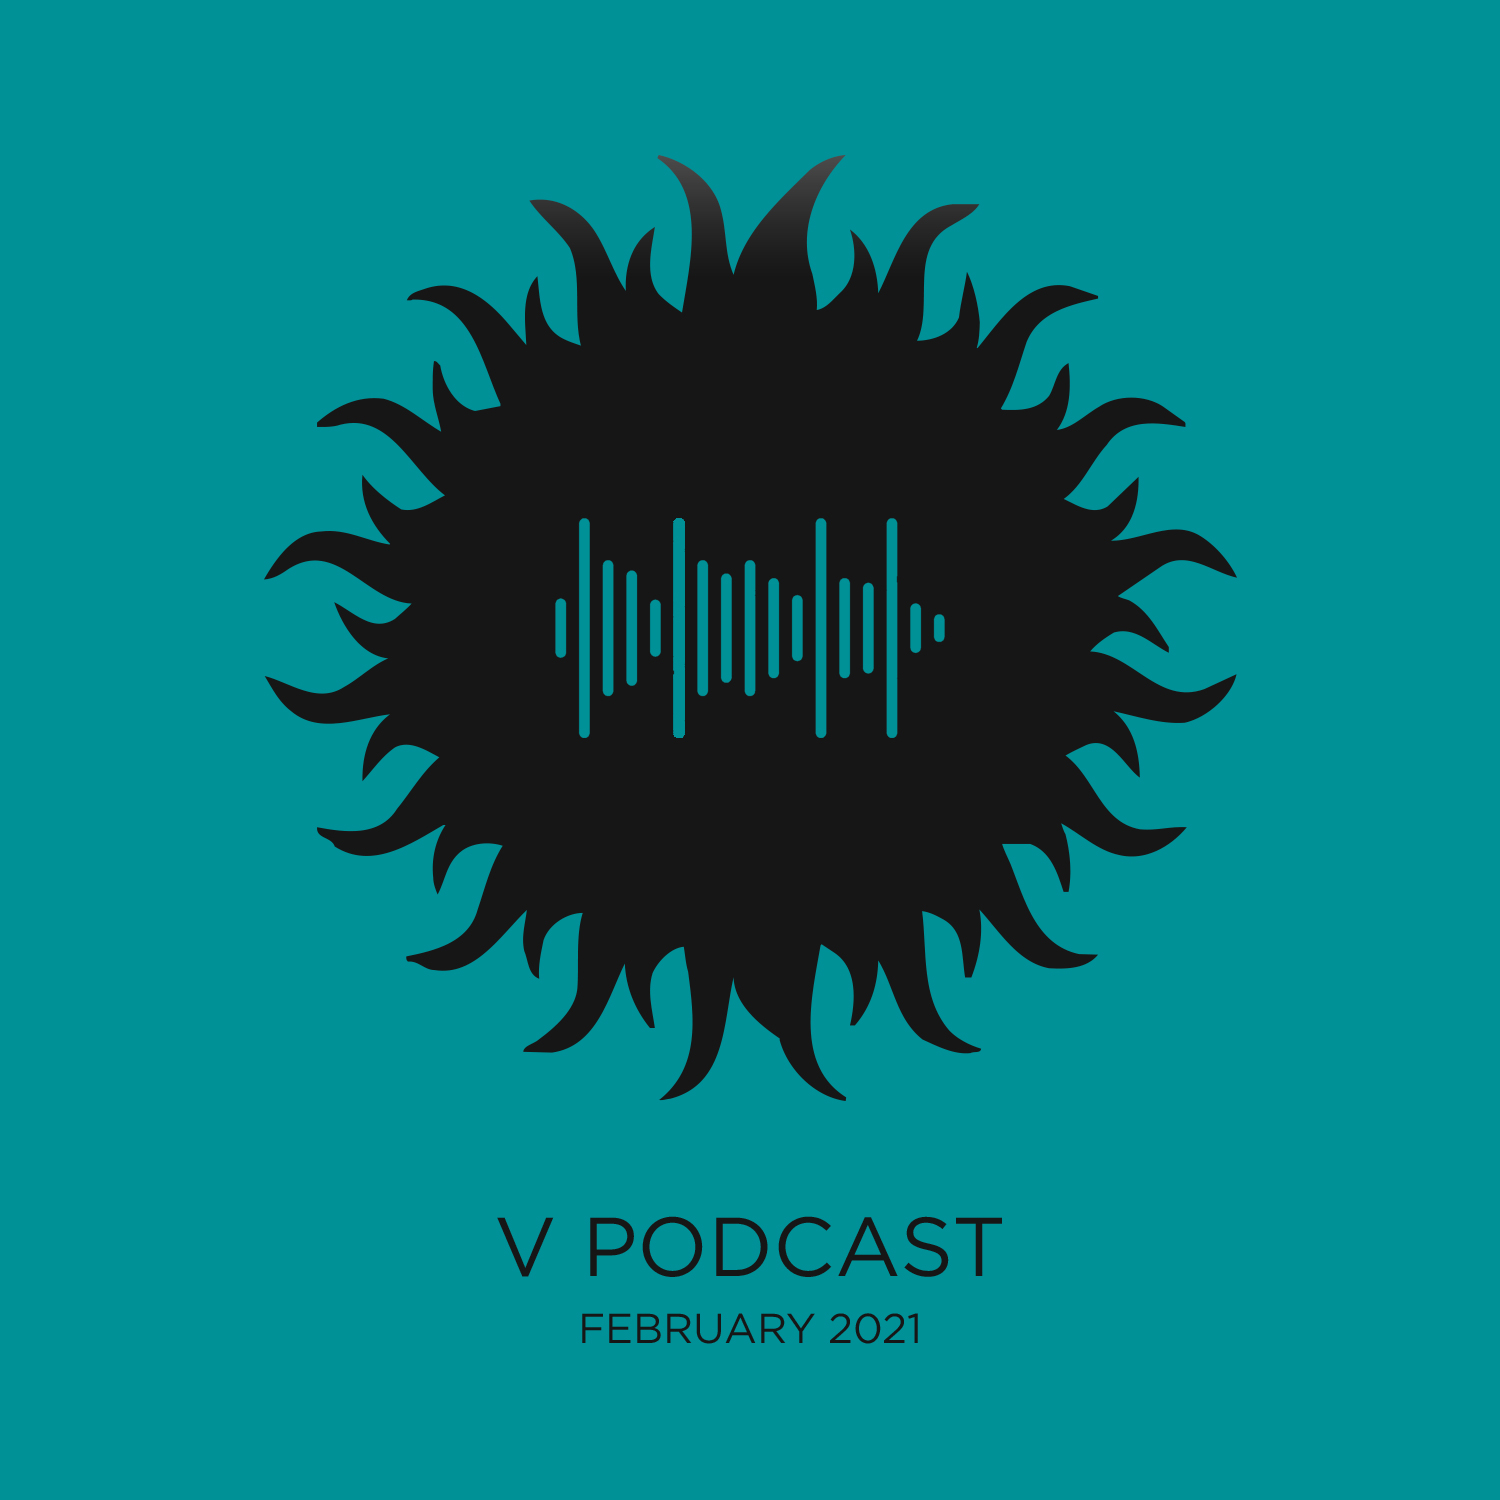 V Podcast 104 - Drum and Bass - Hosted By Bryan Gee Artwork